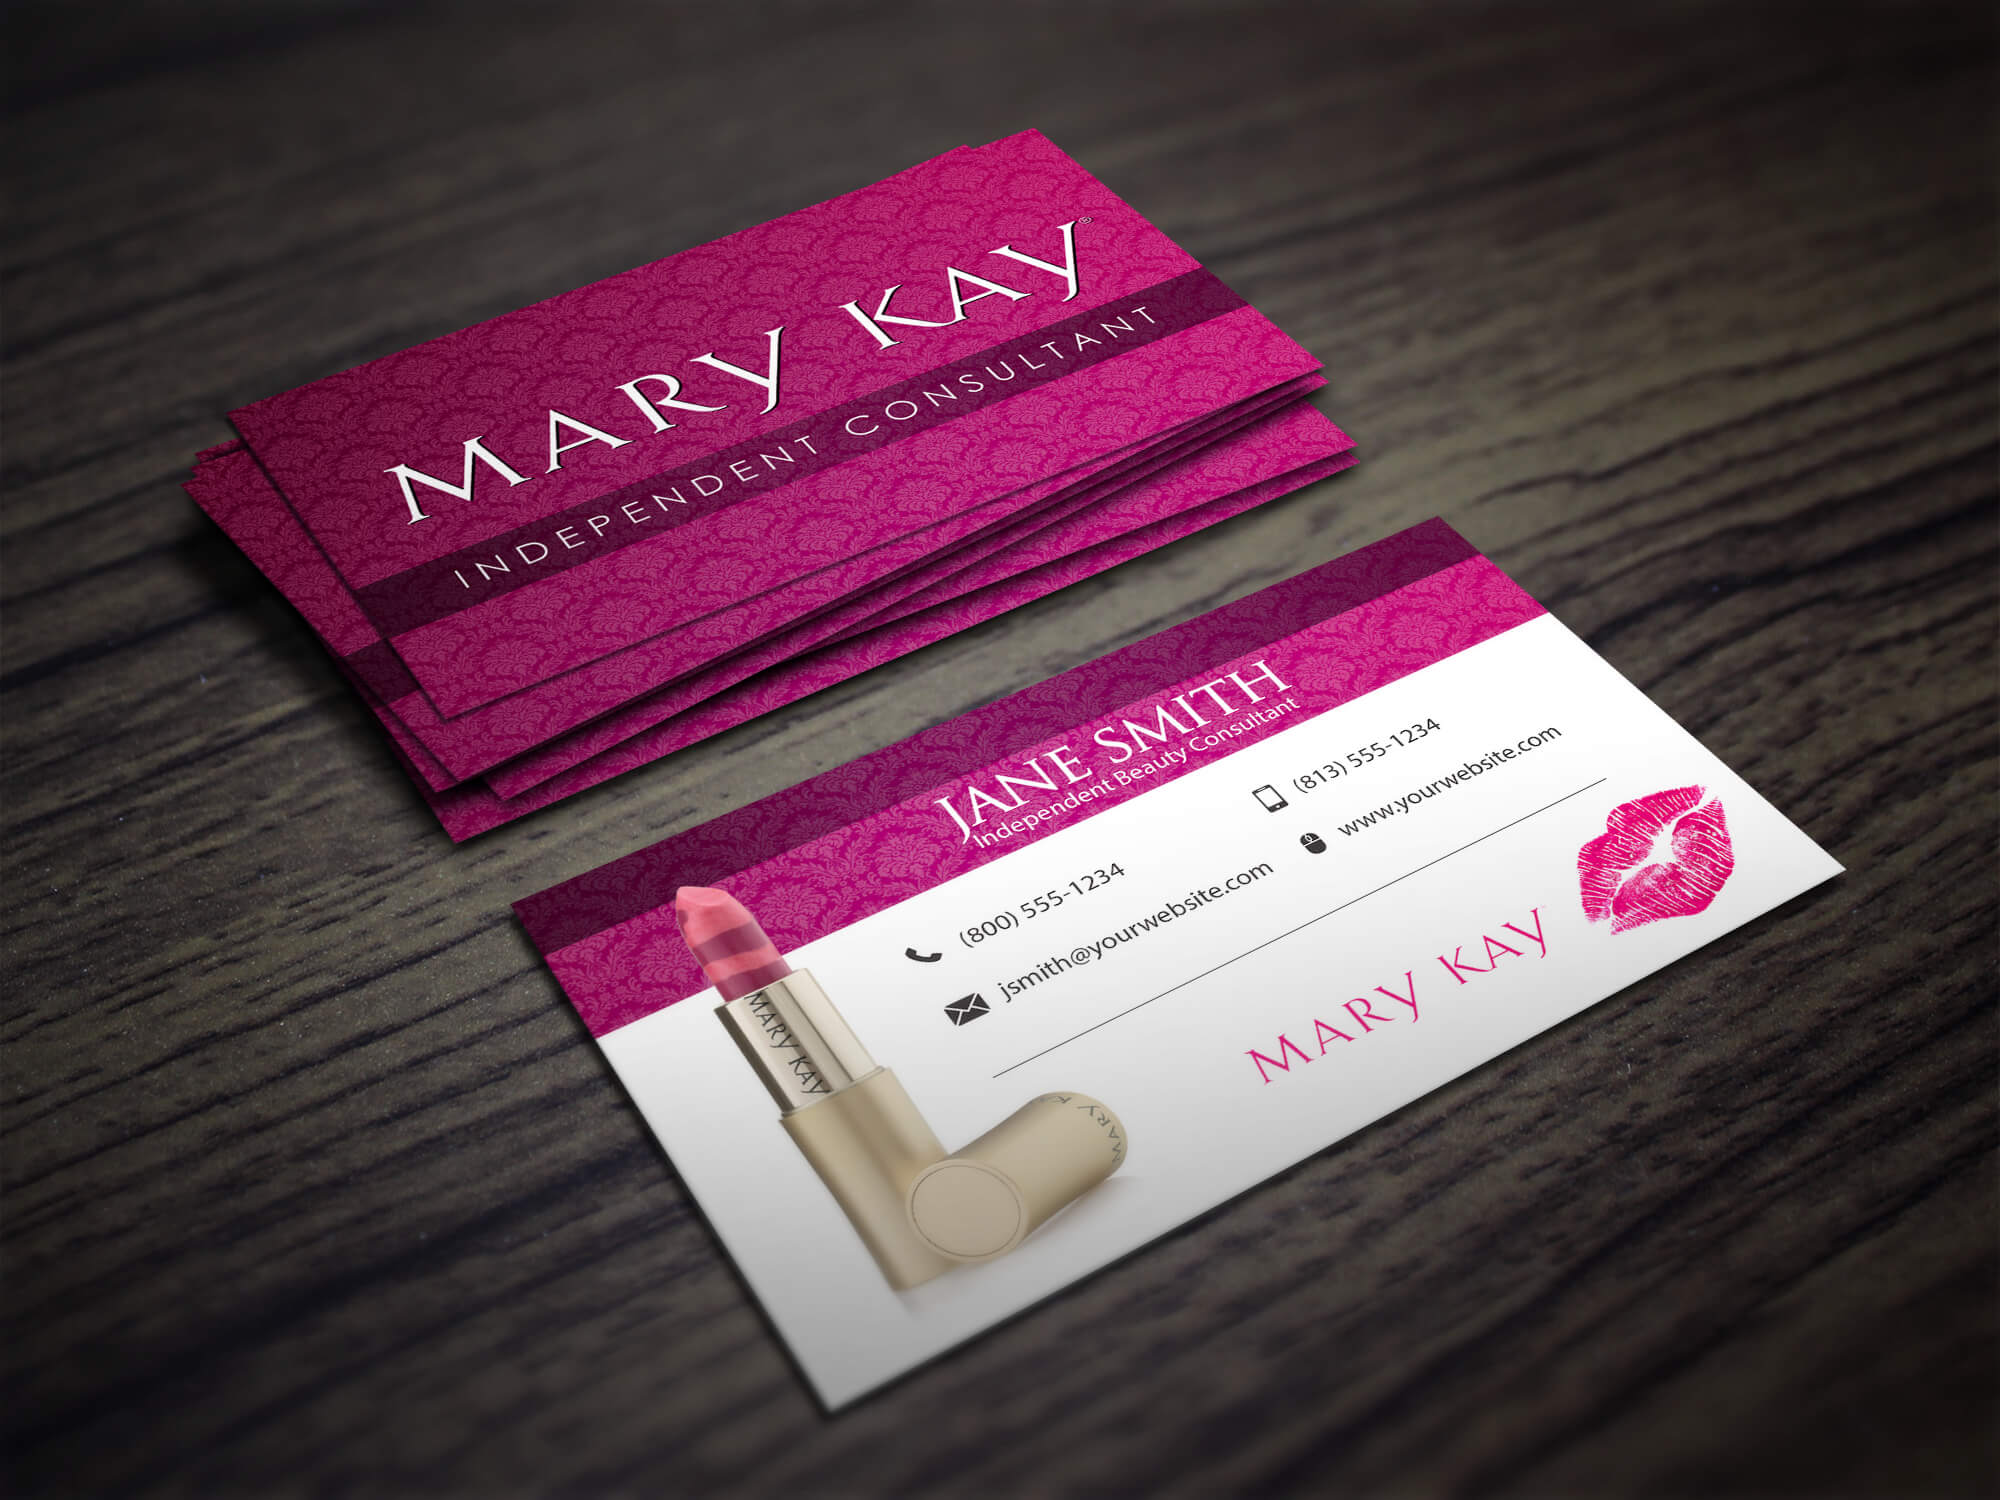 Mary Kay Business Cards | Makeup Business Cards, Mary Kay With Regard To Mary Kay Business Cards Templates Free